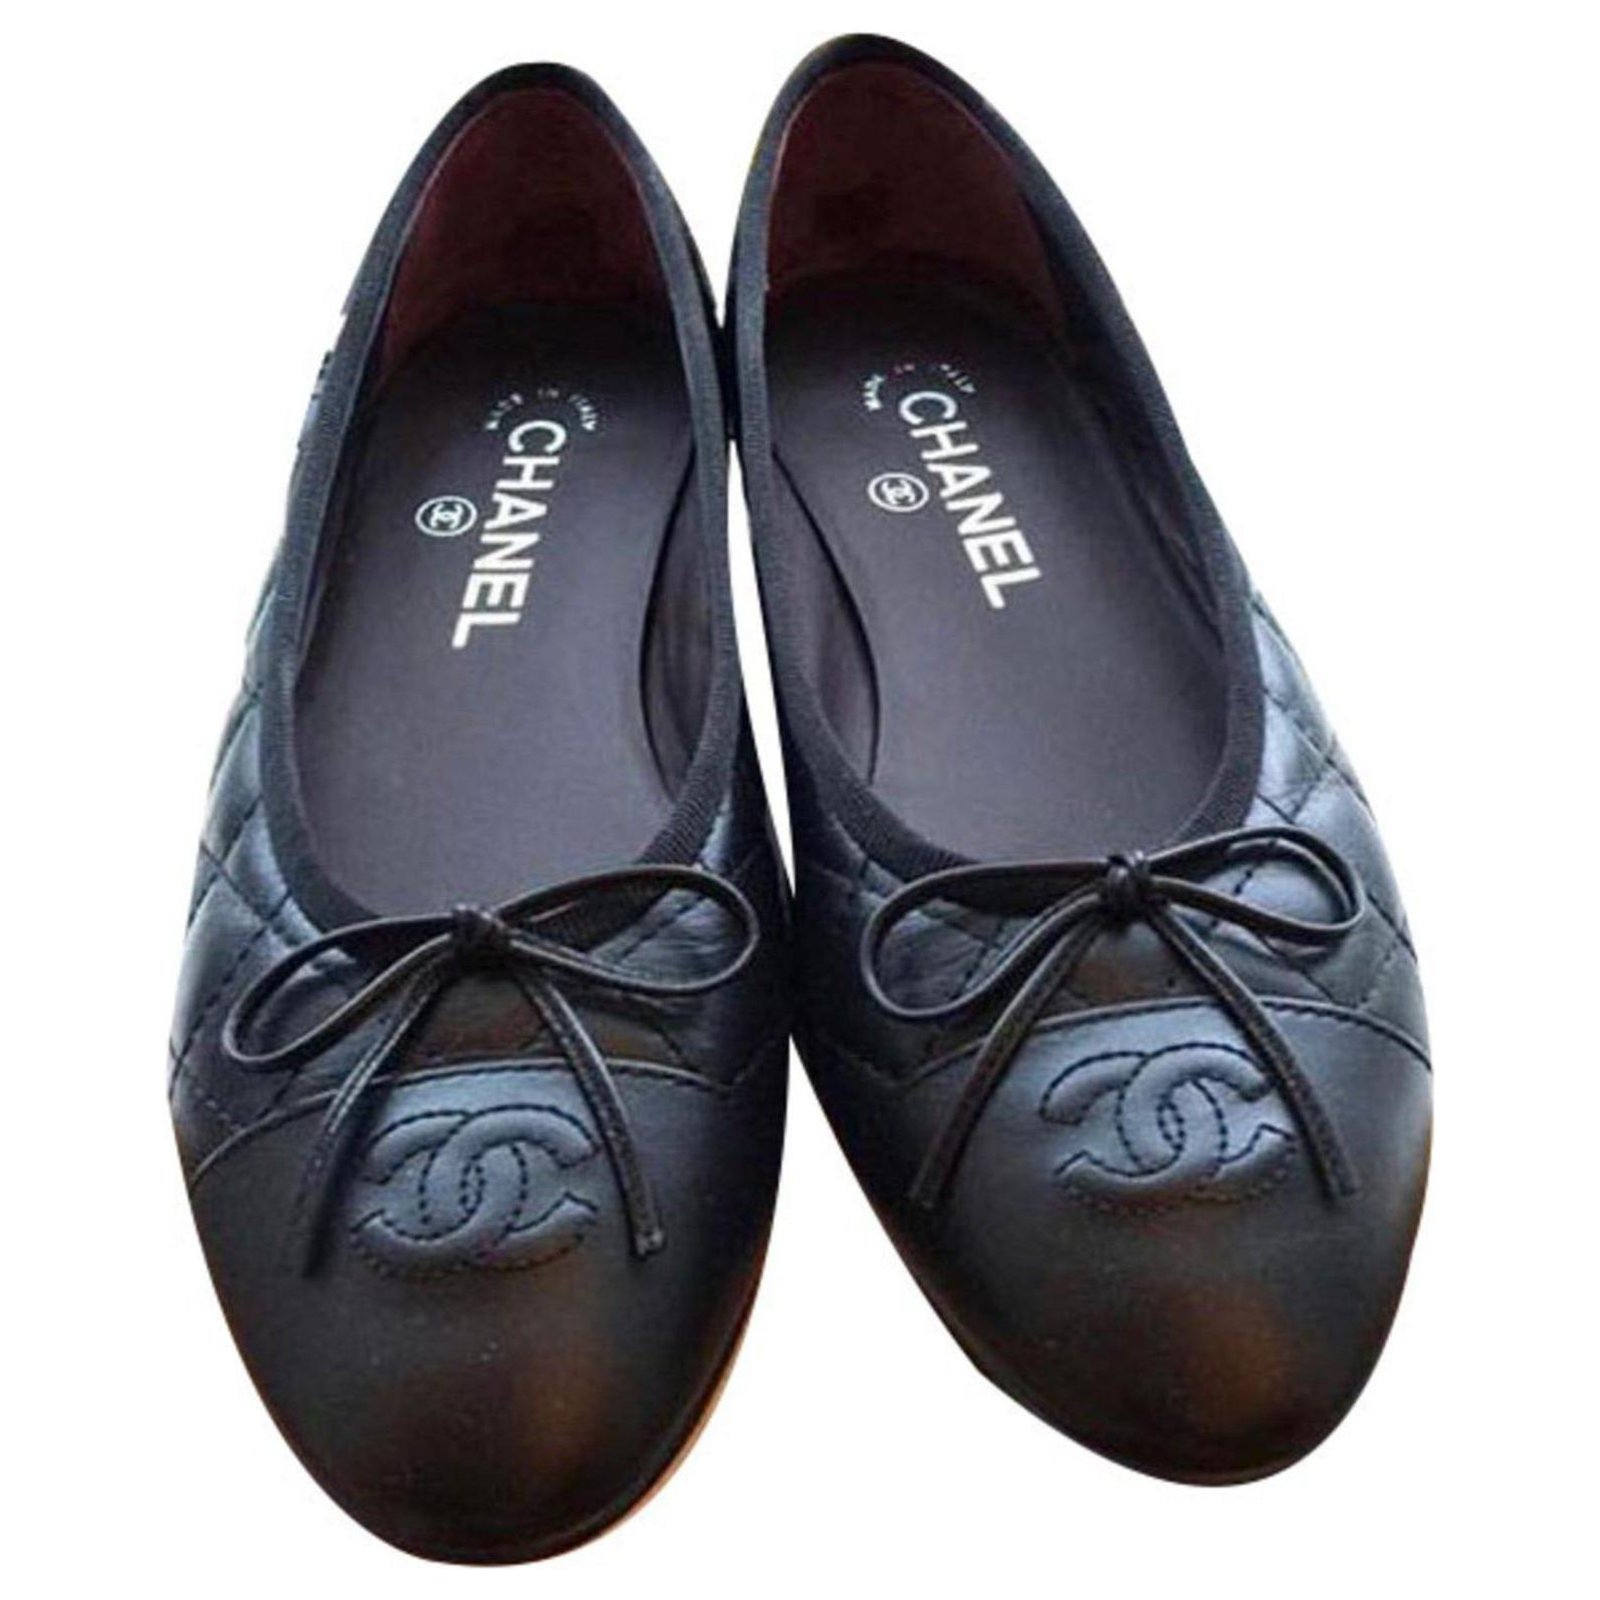 CHANEL BALLERINES BALLERINE BALLET FLATS QUILTED WITH BOX Black Leather ...